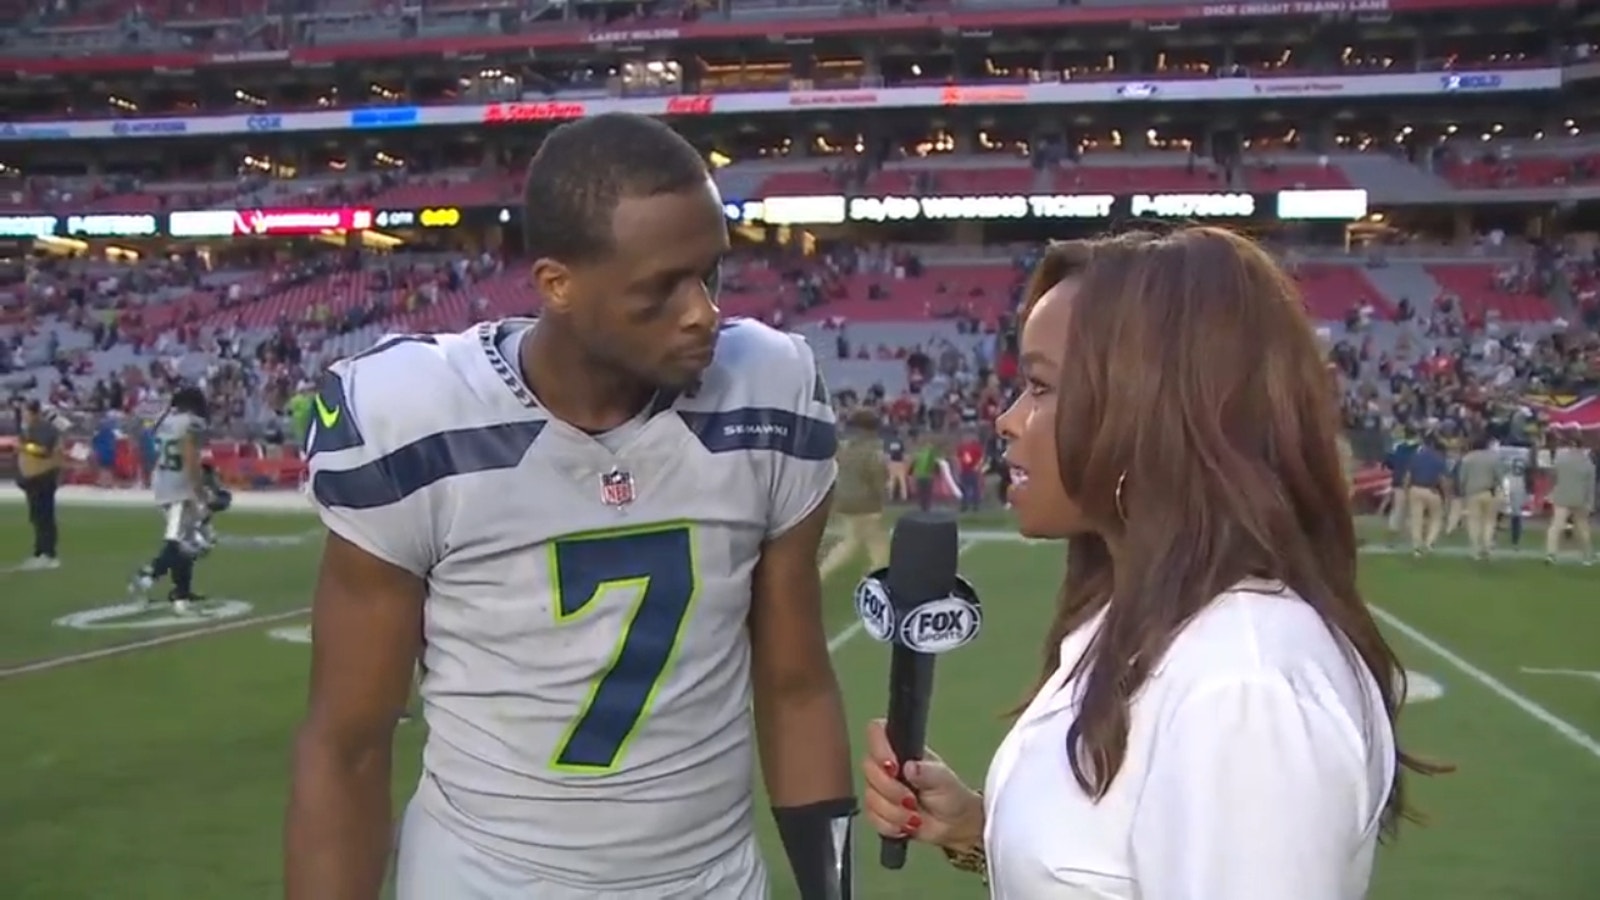 'We kept fighting '- Geno Smith on how the Seahawks kept fighting to secure the win against the Cardinals